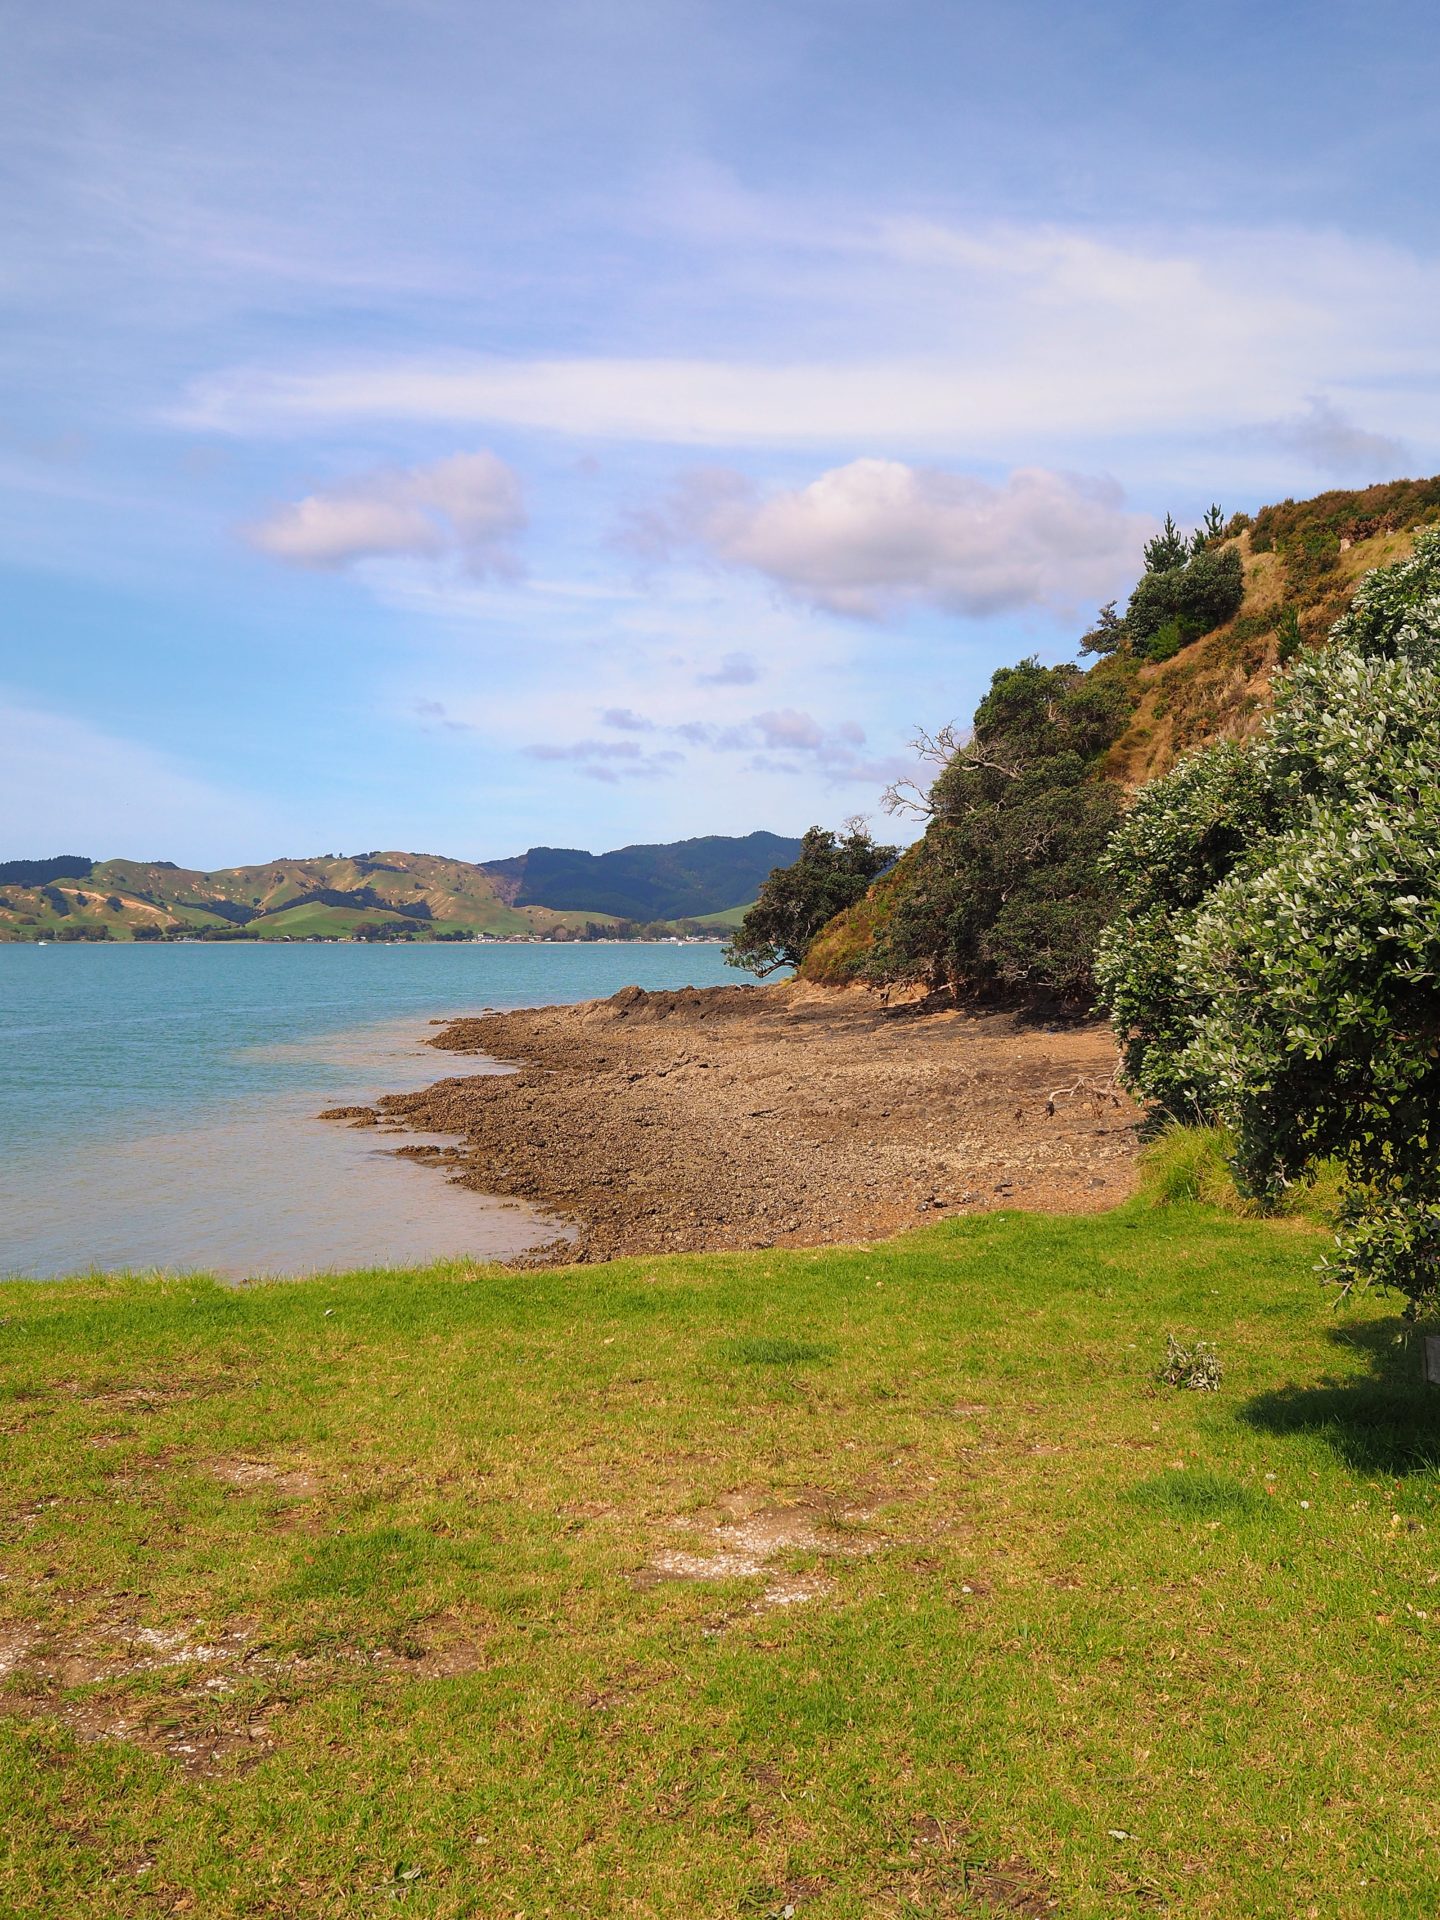 New Zealand Travel InspirationAn Autumn Picnic at Waitawa Regional Park, Auckland. Auckland is a fabulous city but you have to find the hidden gems that aren't in the travel guides. #newzealand #beautifuldestinations #auckland #aucklandnewzealand #80pairsofshoes #travel